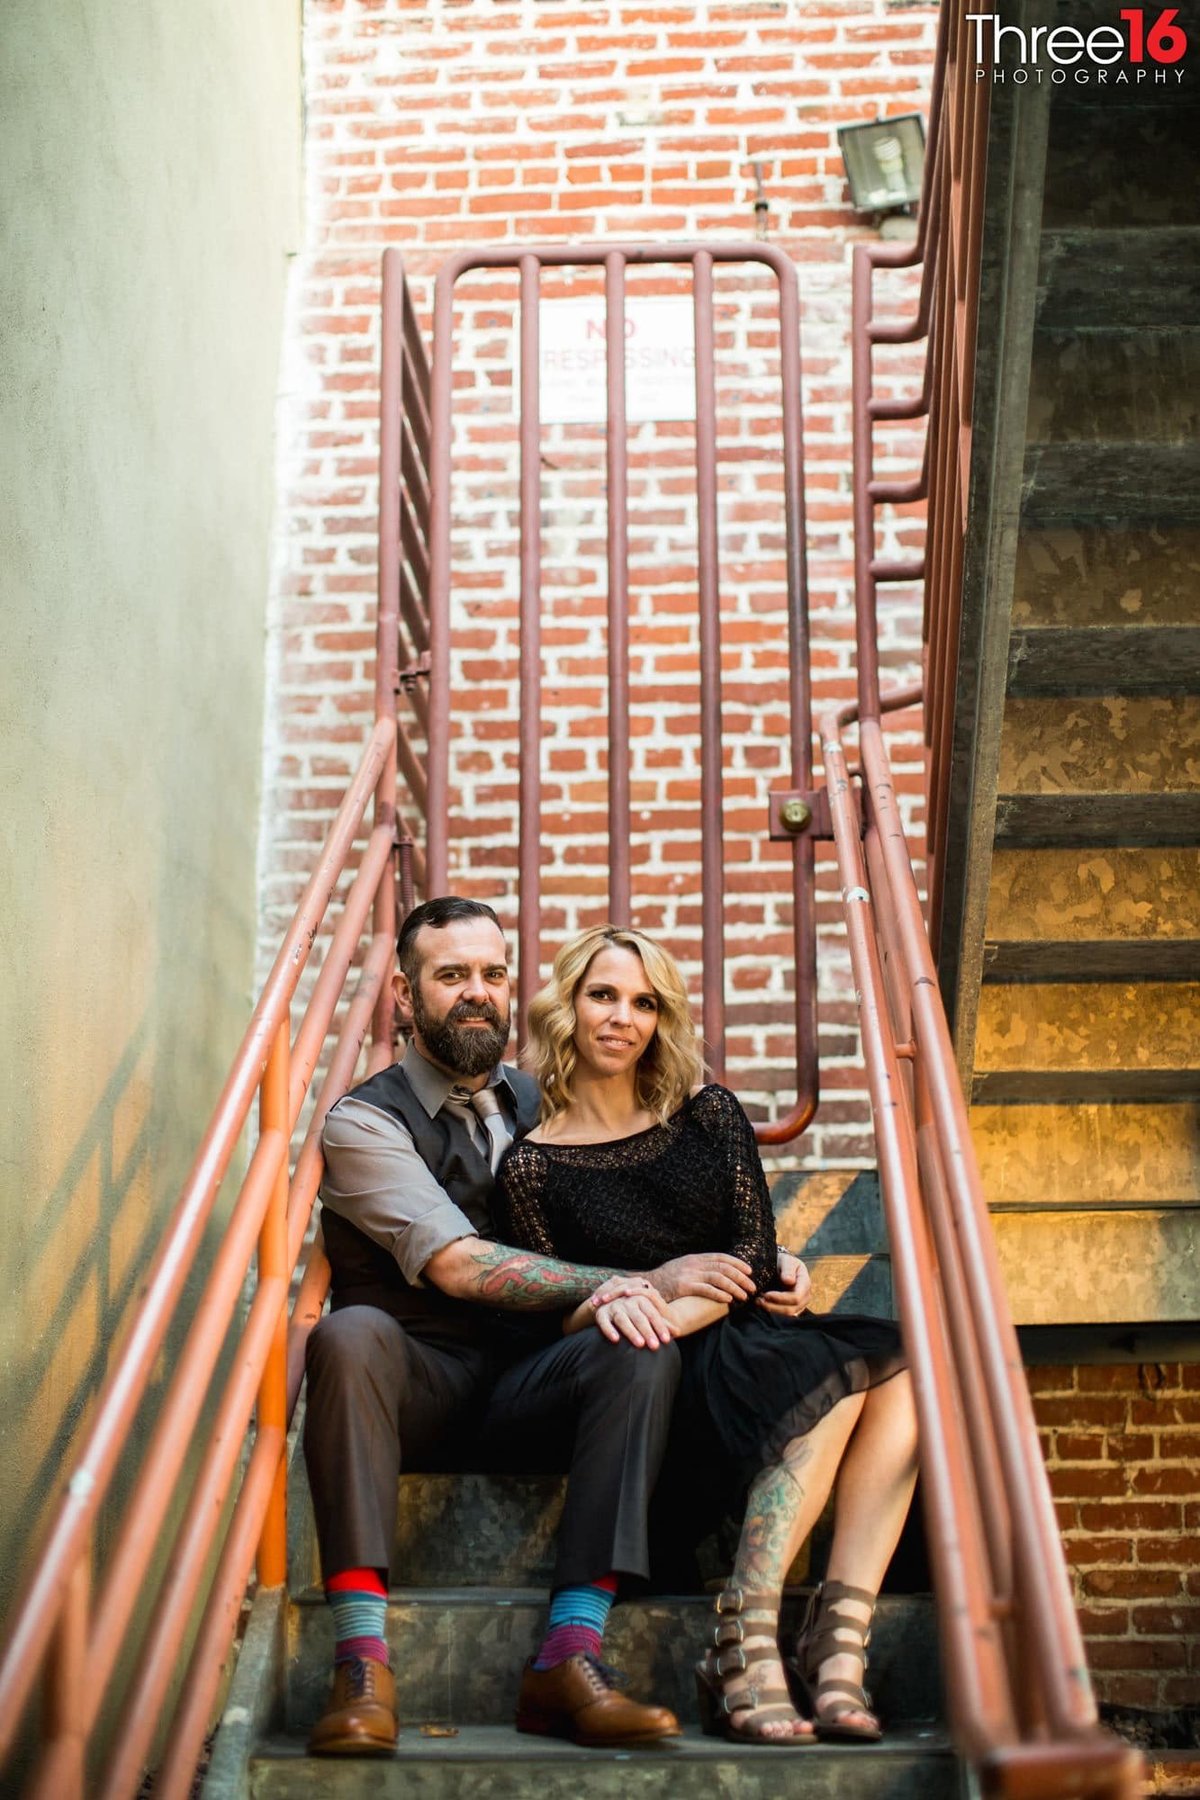 Engaged couple cozy up together sitting on an old outdoor staircase